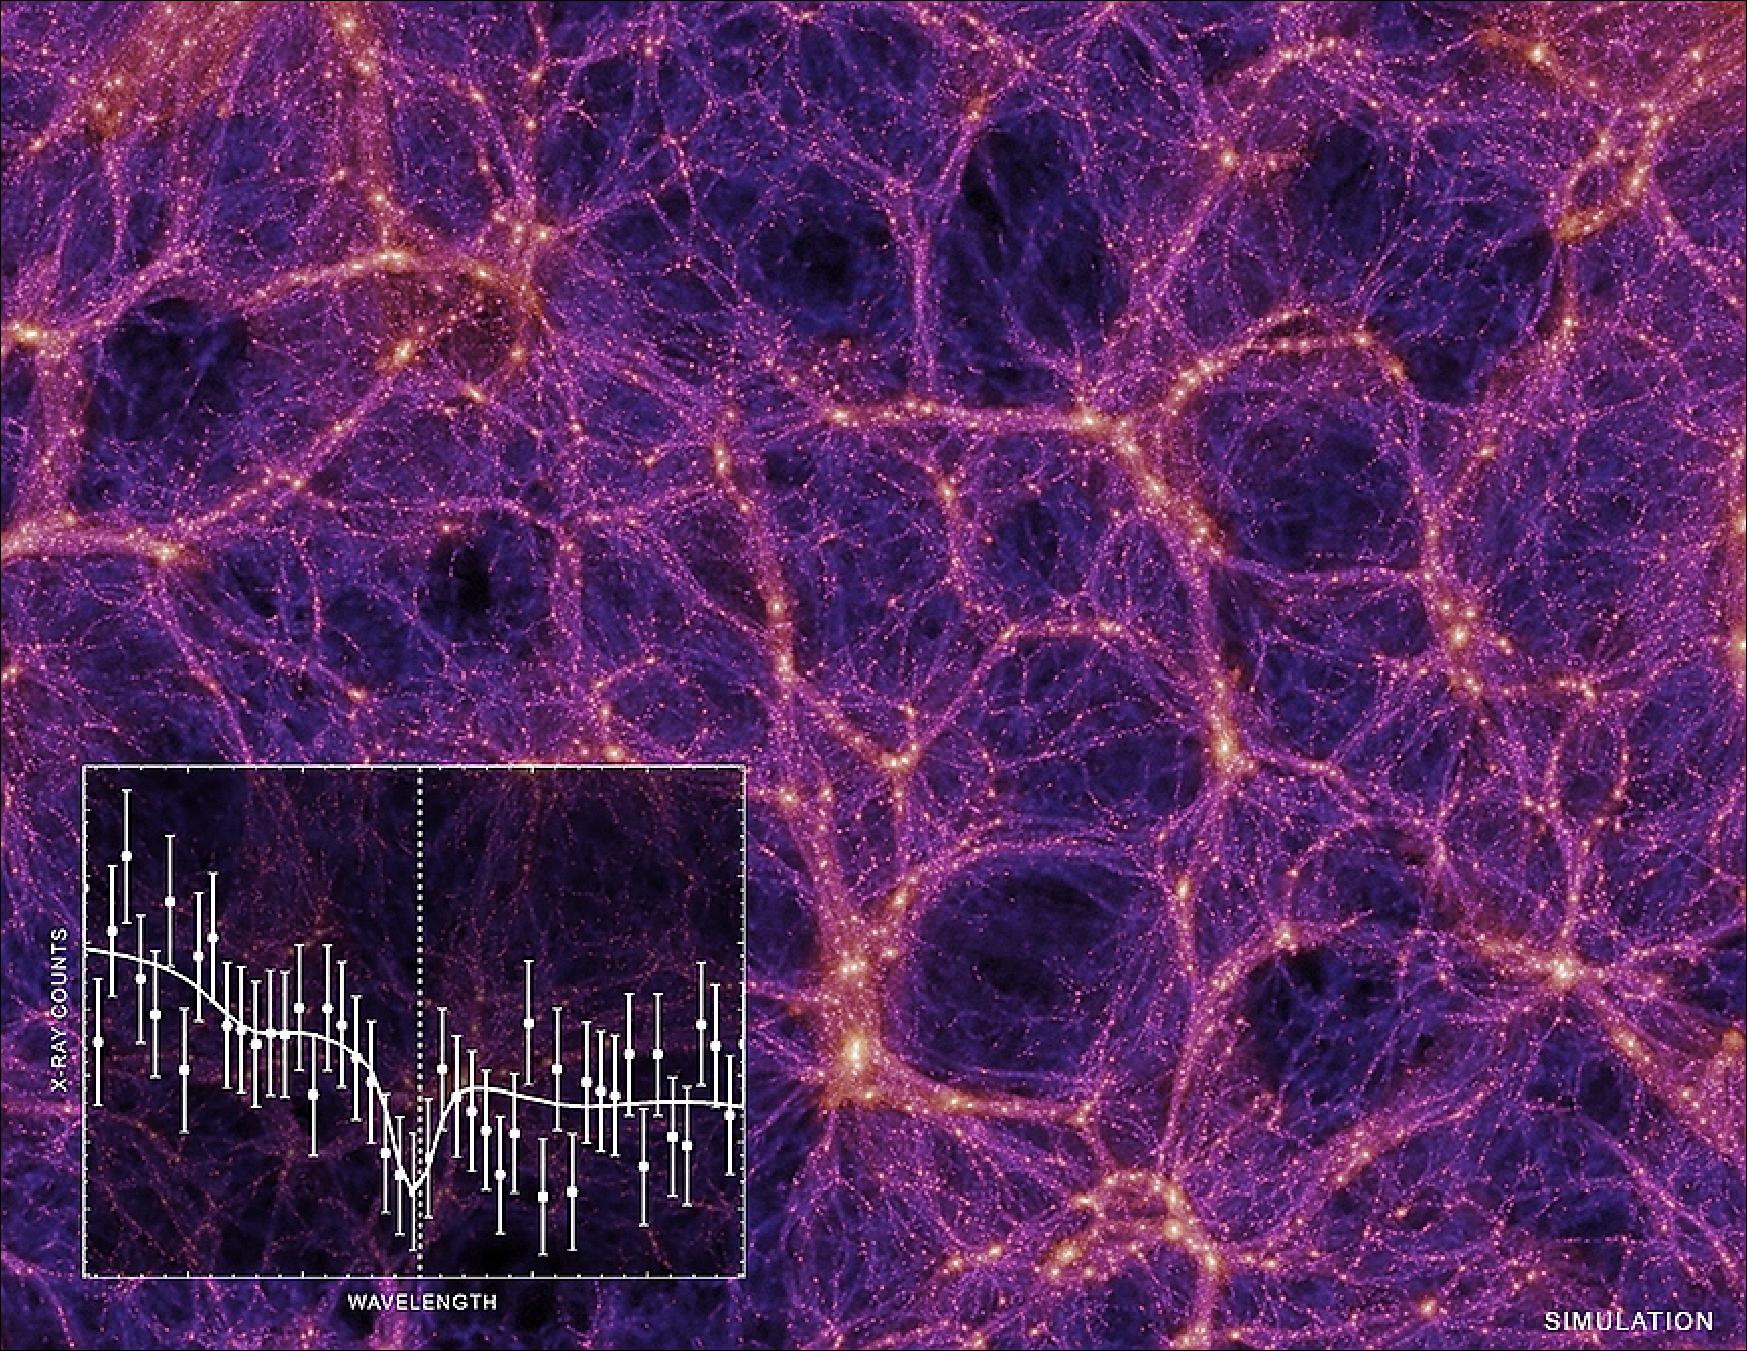 Figure 43: The Universe's "missing mass" may have been found, according to a new study using Chandra data. About a third of the "normal" matter (ie, hydrogen, helium, and other elements) created shortly after the Big Bang is not seen in the present-day Universe. One idea is that this missing mass is today in filaments of warm and hot gas known as the WHIM. Researchers suggest evidence for the WHIM is seen in absorption features in X-rays collected from a quasar billions of light years away (image credit: Illustration: Springel et al. (2005); Spectrum: NASA/CXC/CfA/Kovács et al.)